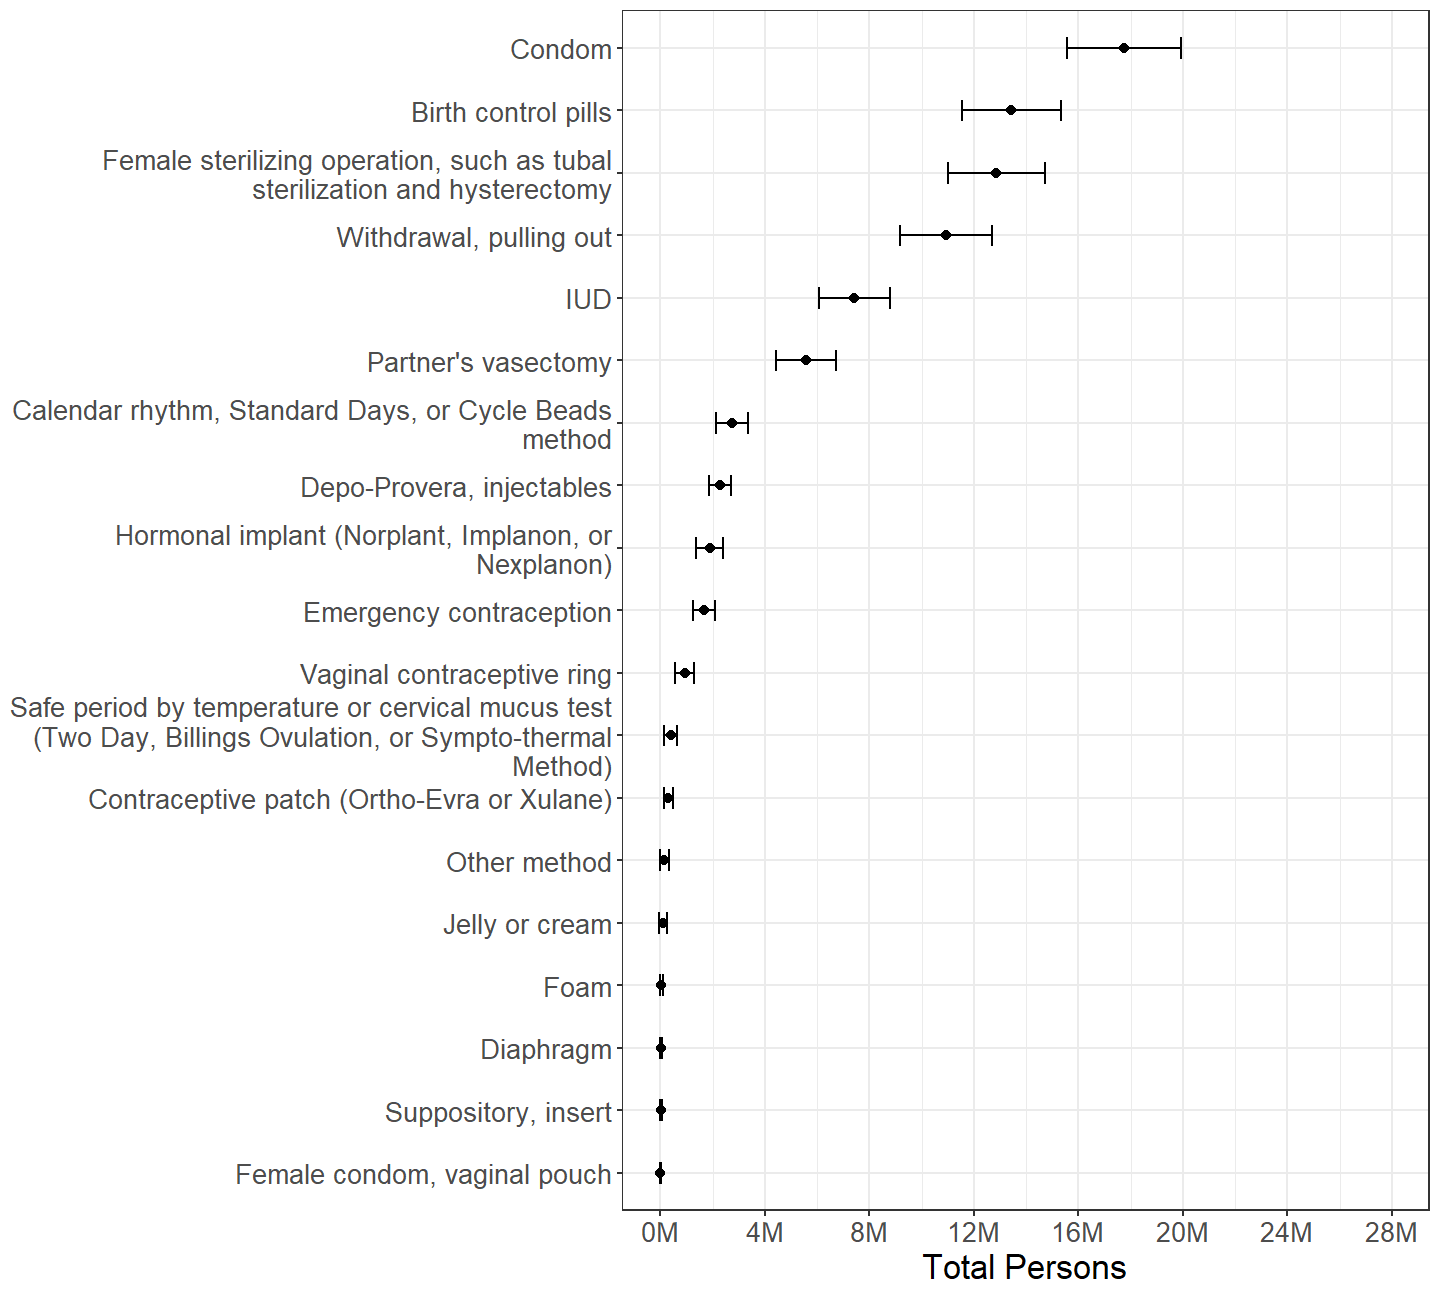 Females categorized by whether or not each contraceptive method was used at all during the past 12 months, with persons using multiple methods counted multiple times.